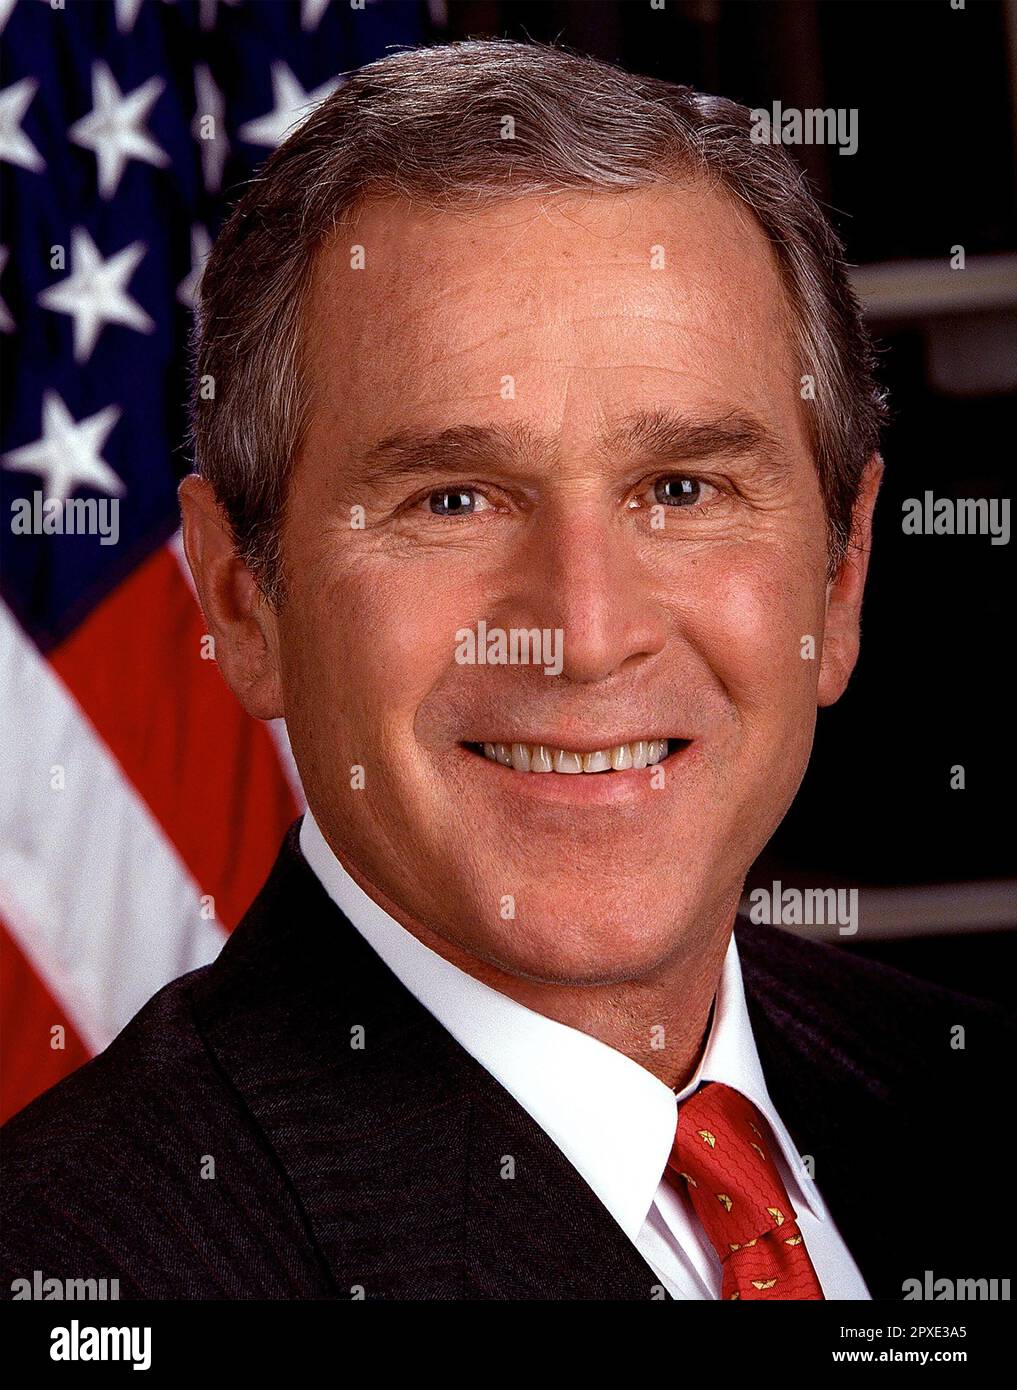 GEORGE W. BUSH  American politician as Governor of Texas in 1995 Stock Photo